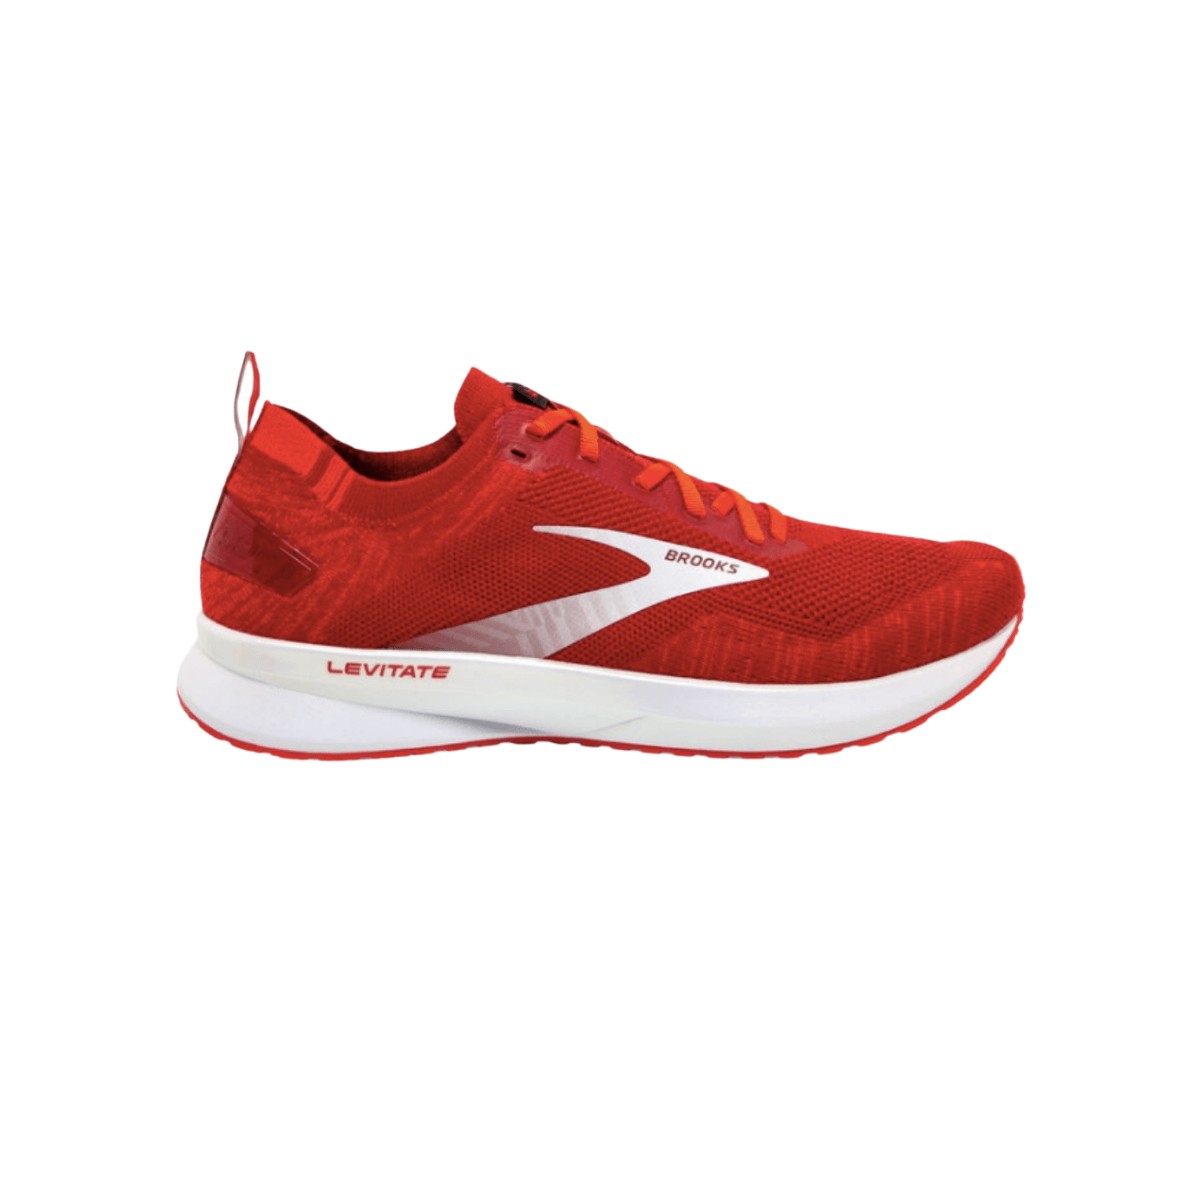 Chaussures Homme Brooks Levitate 4 Rouge Blanc AW20, Taille 40,5 - EUR